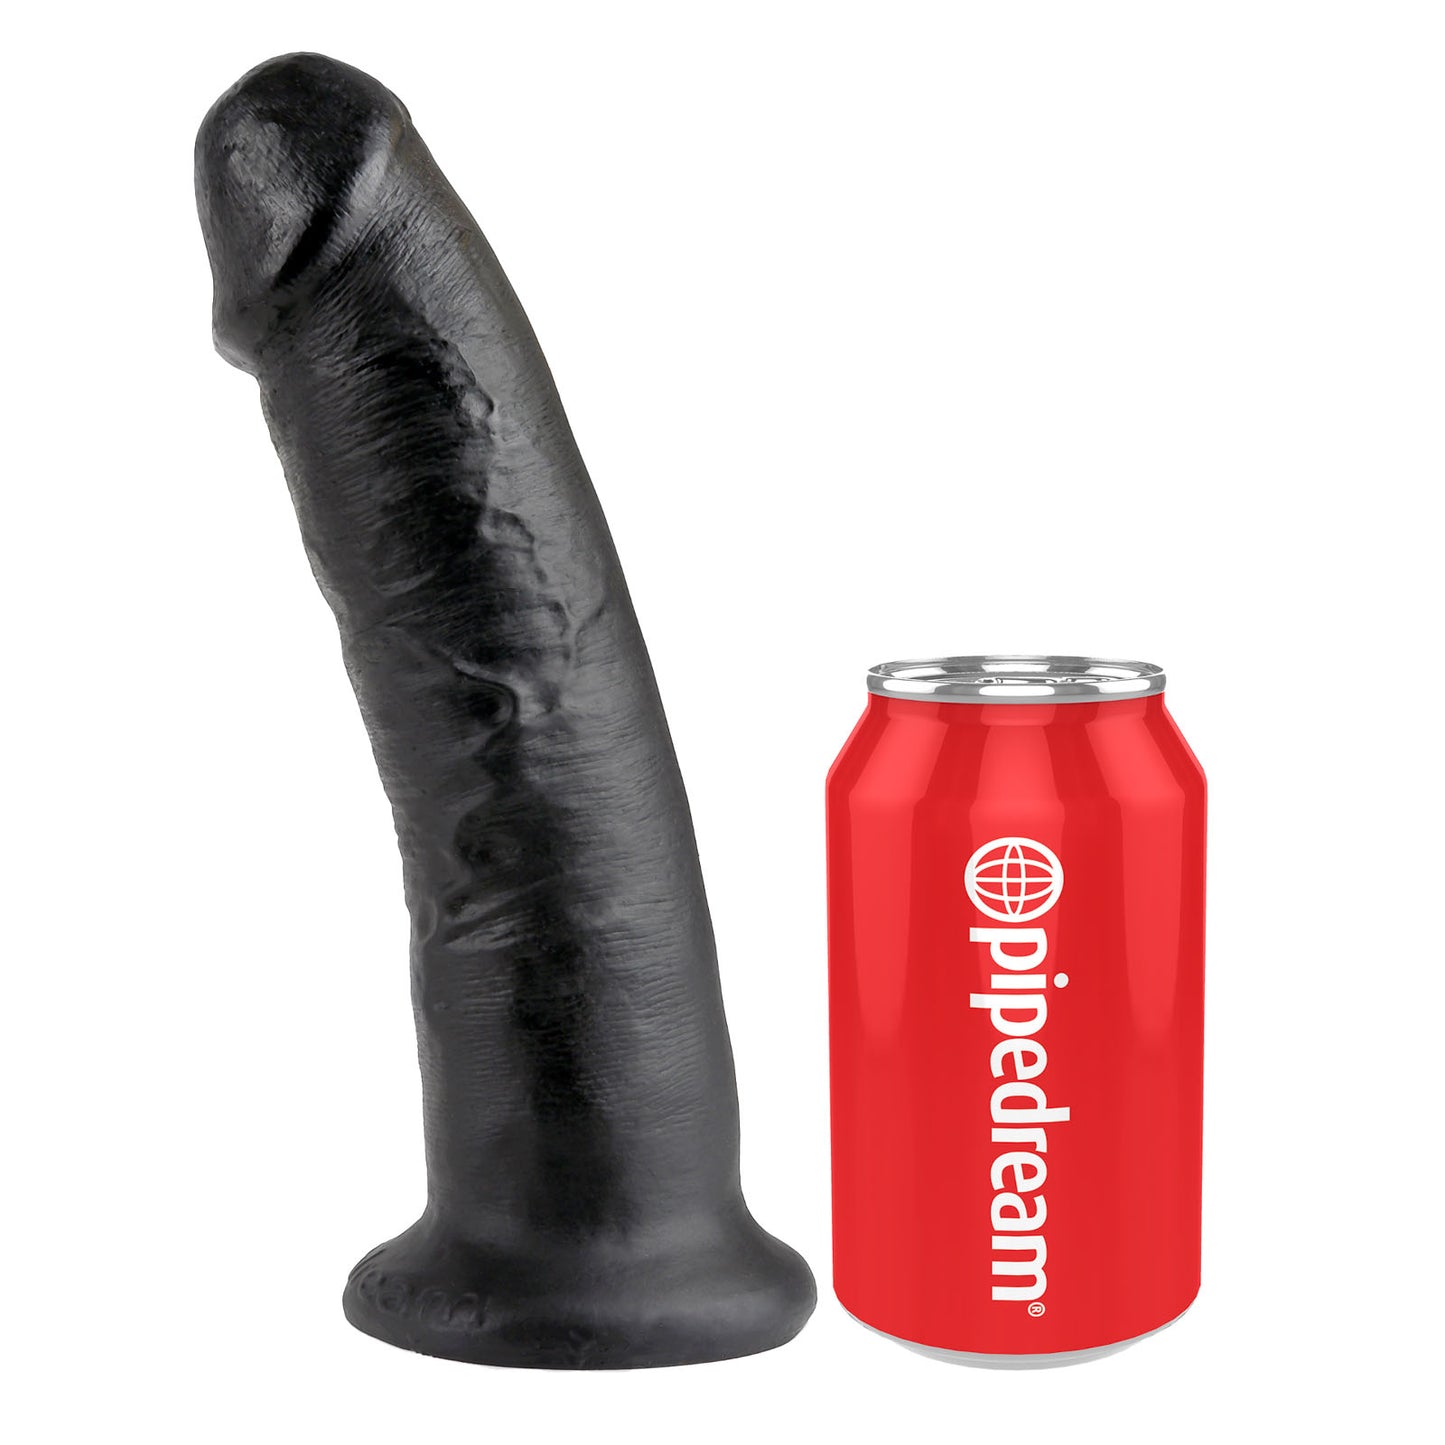 King Cock Ultra Realistic 9 Inch Black Dildo With Suction Cup